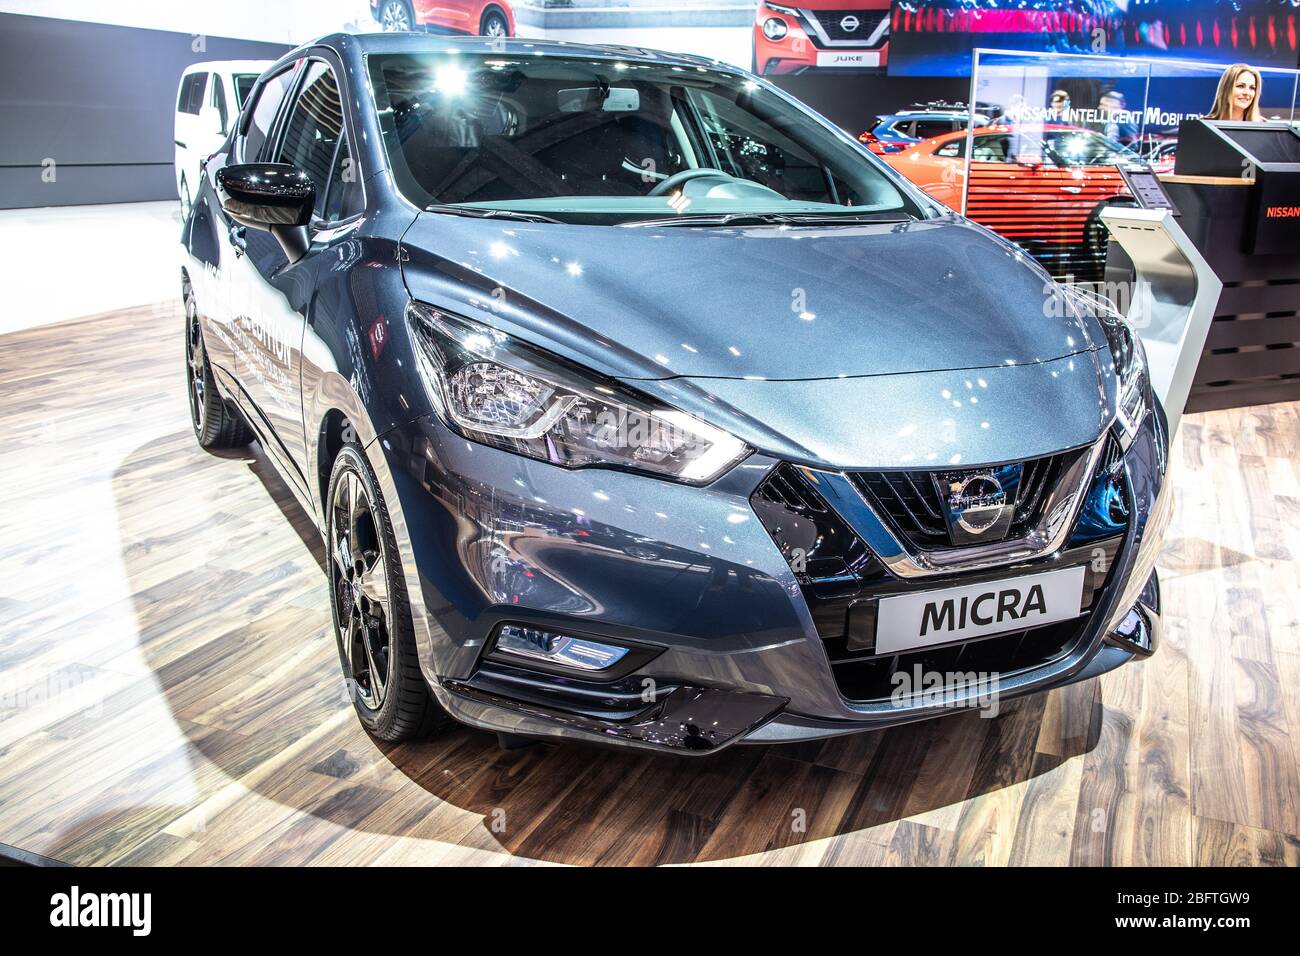 Brussels, Belgium, Jan 2019: Nissan Qashqai, Brussels Motor Show, 2nd gen,  J11, compact crossover SUV produced by Japanese car manufacturer Nissan  Stock Photo - Alamy